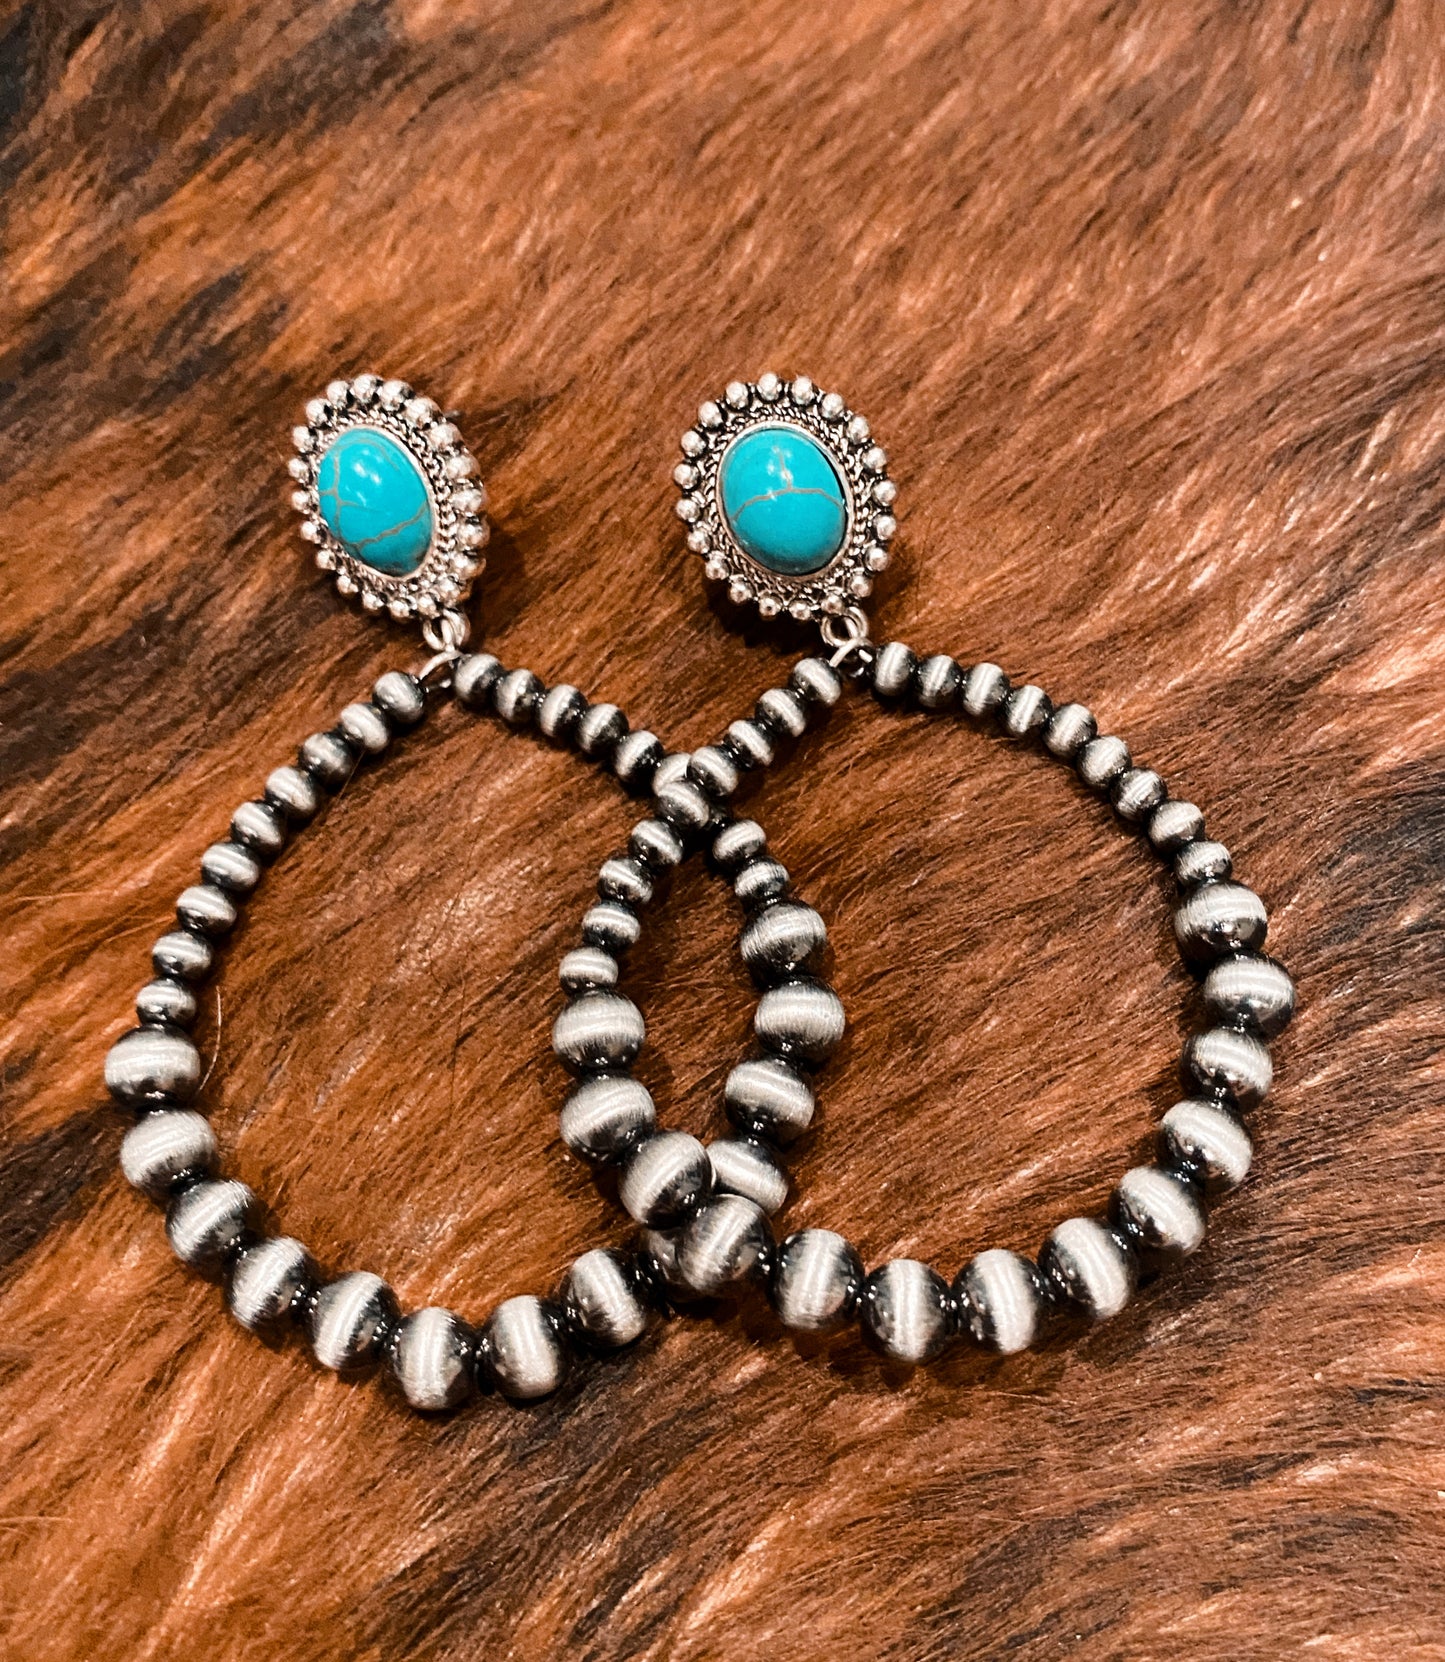 Turquoise stone concho and silver Navajo hoop earrings